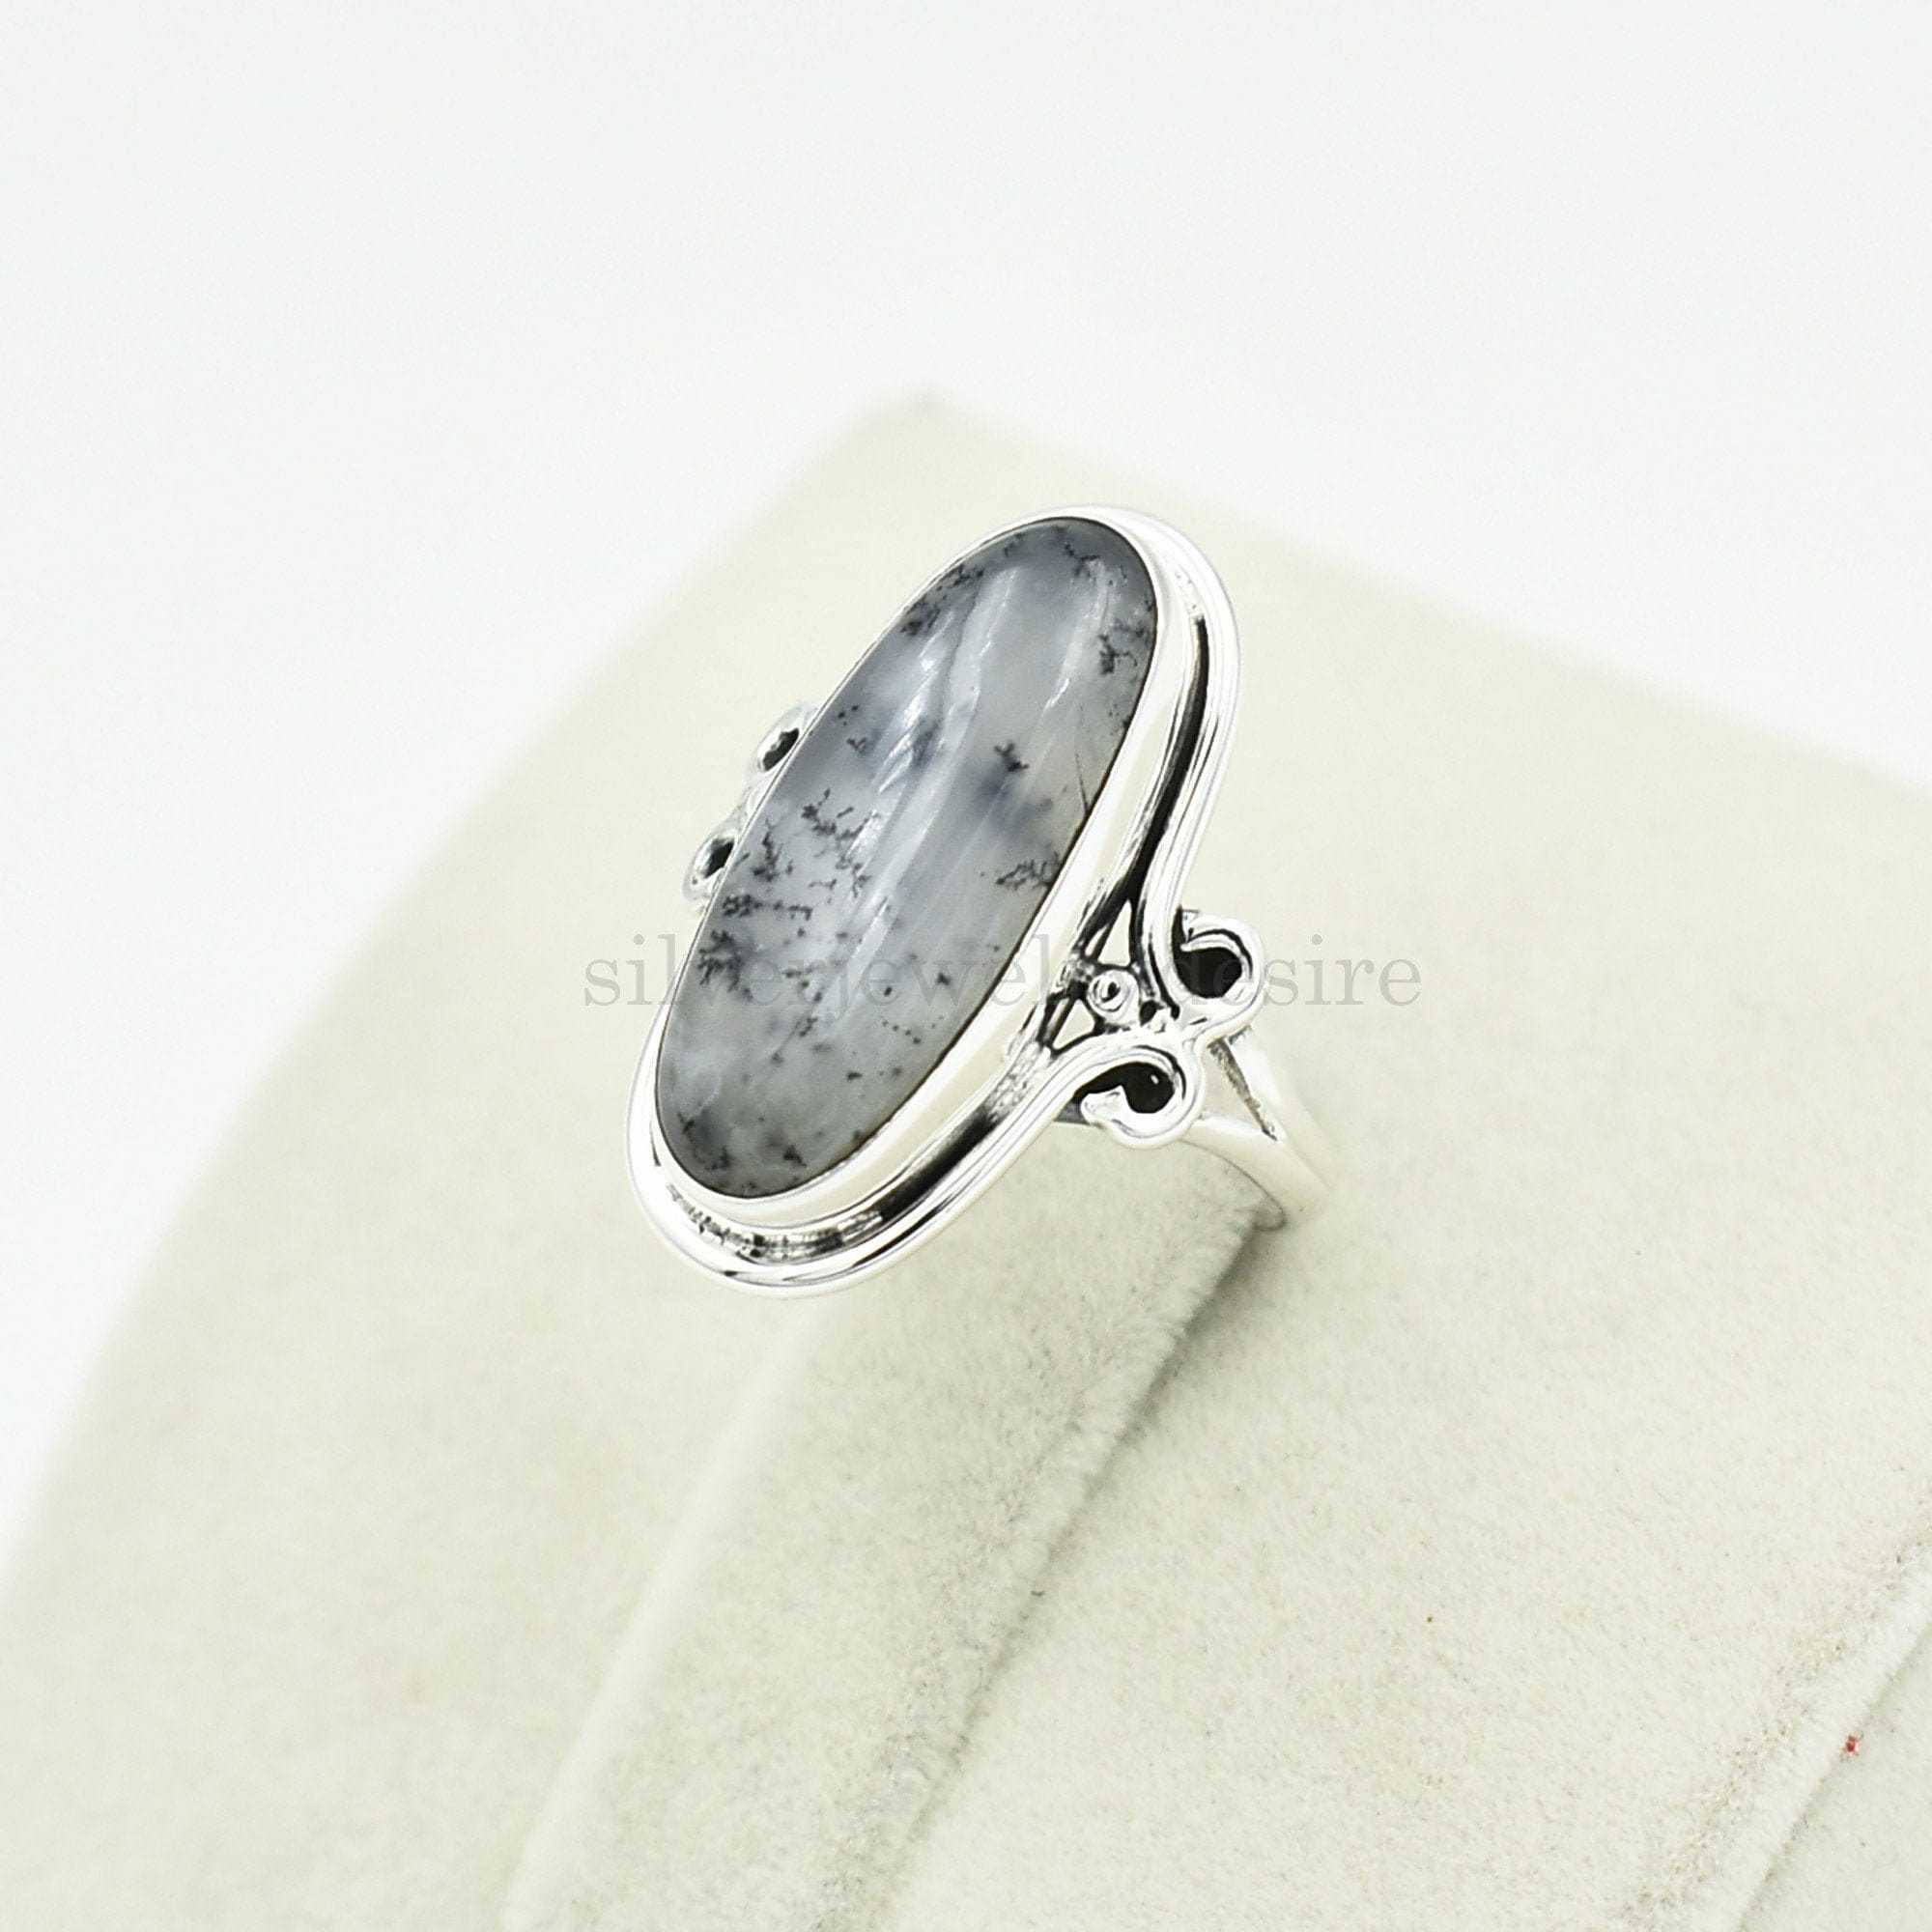 DENDRITE OPALFASHION JEWELRY .925 SILVER PLATED RING S12696